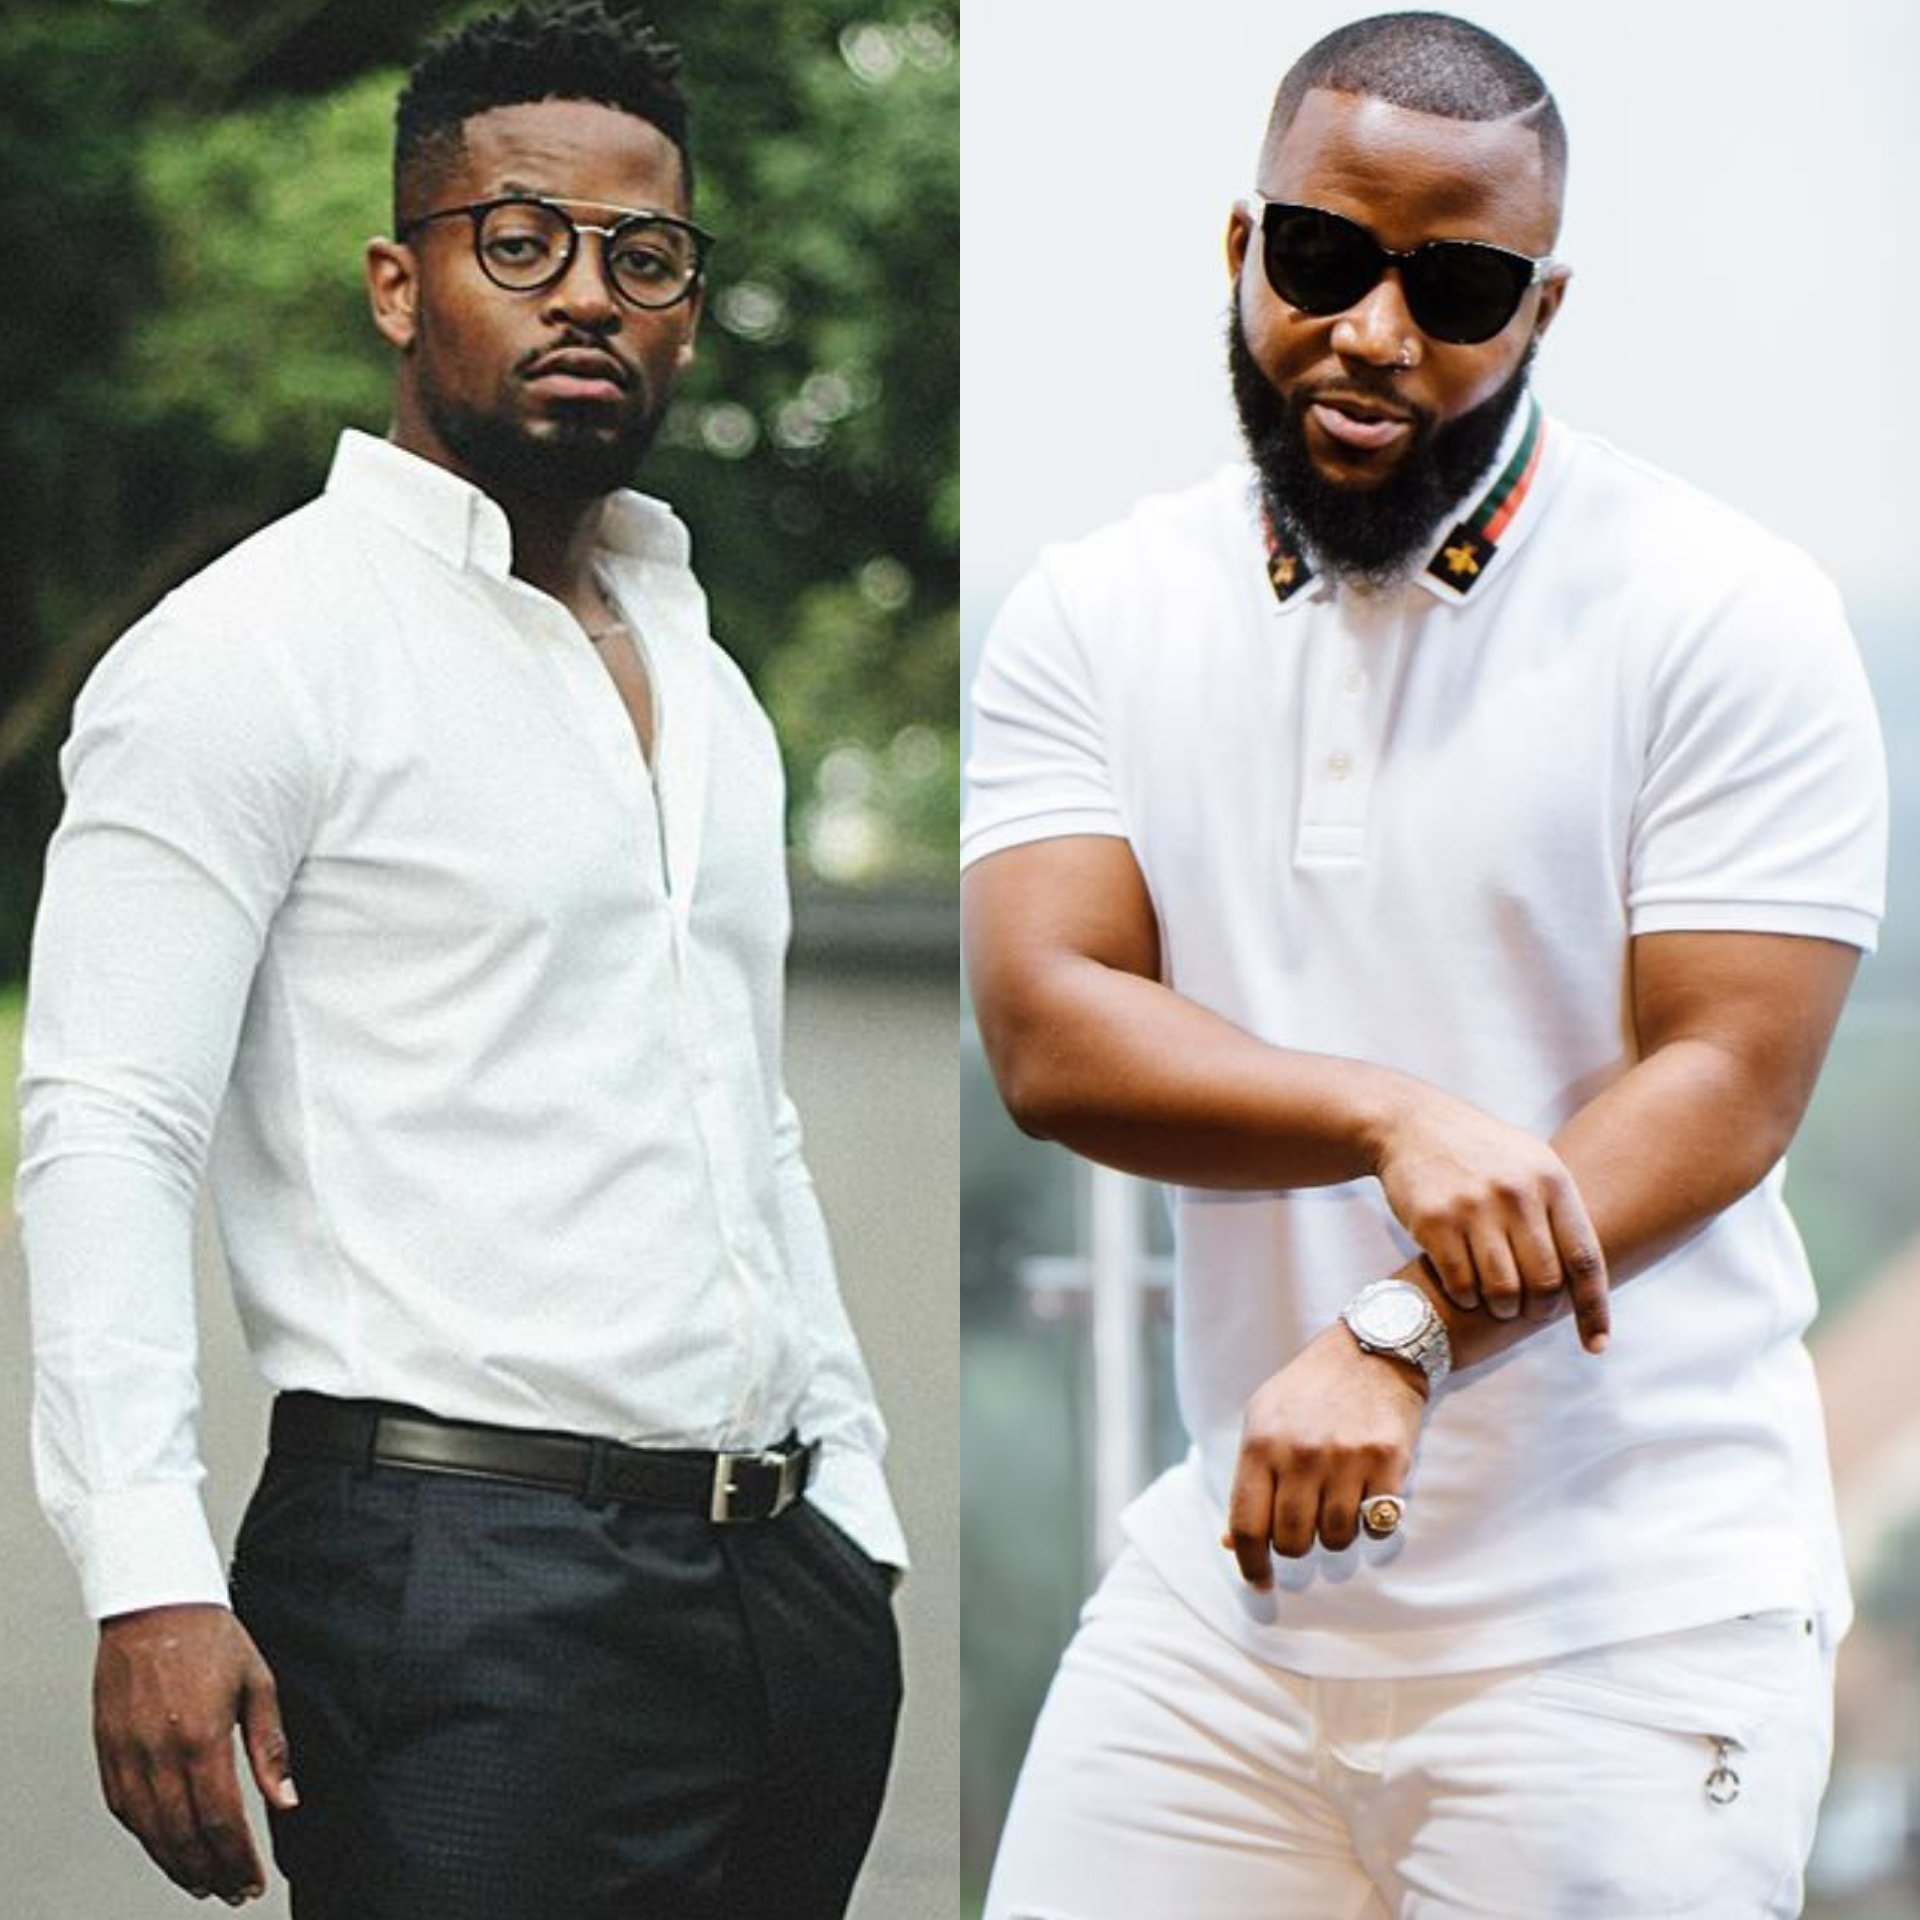 ‘He would have boosted his fame by just being mentioned next to my name’ Cassper mocks Prince Kaybee